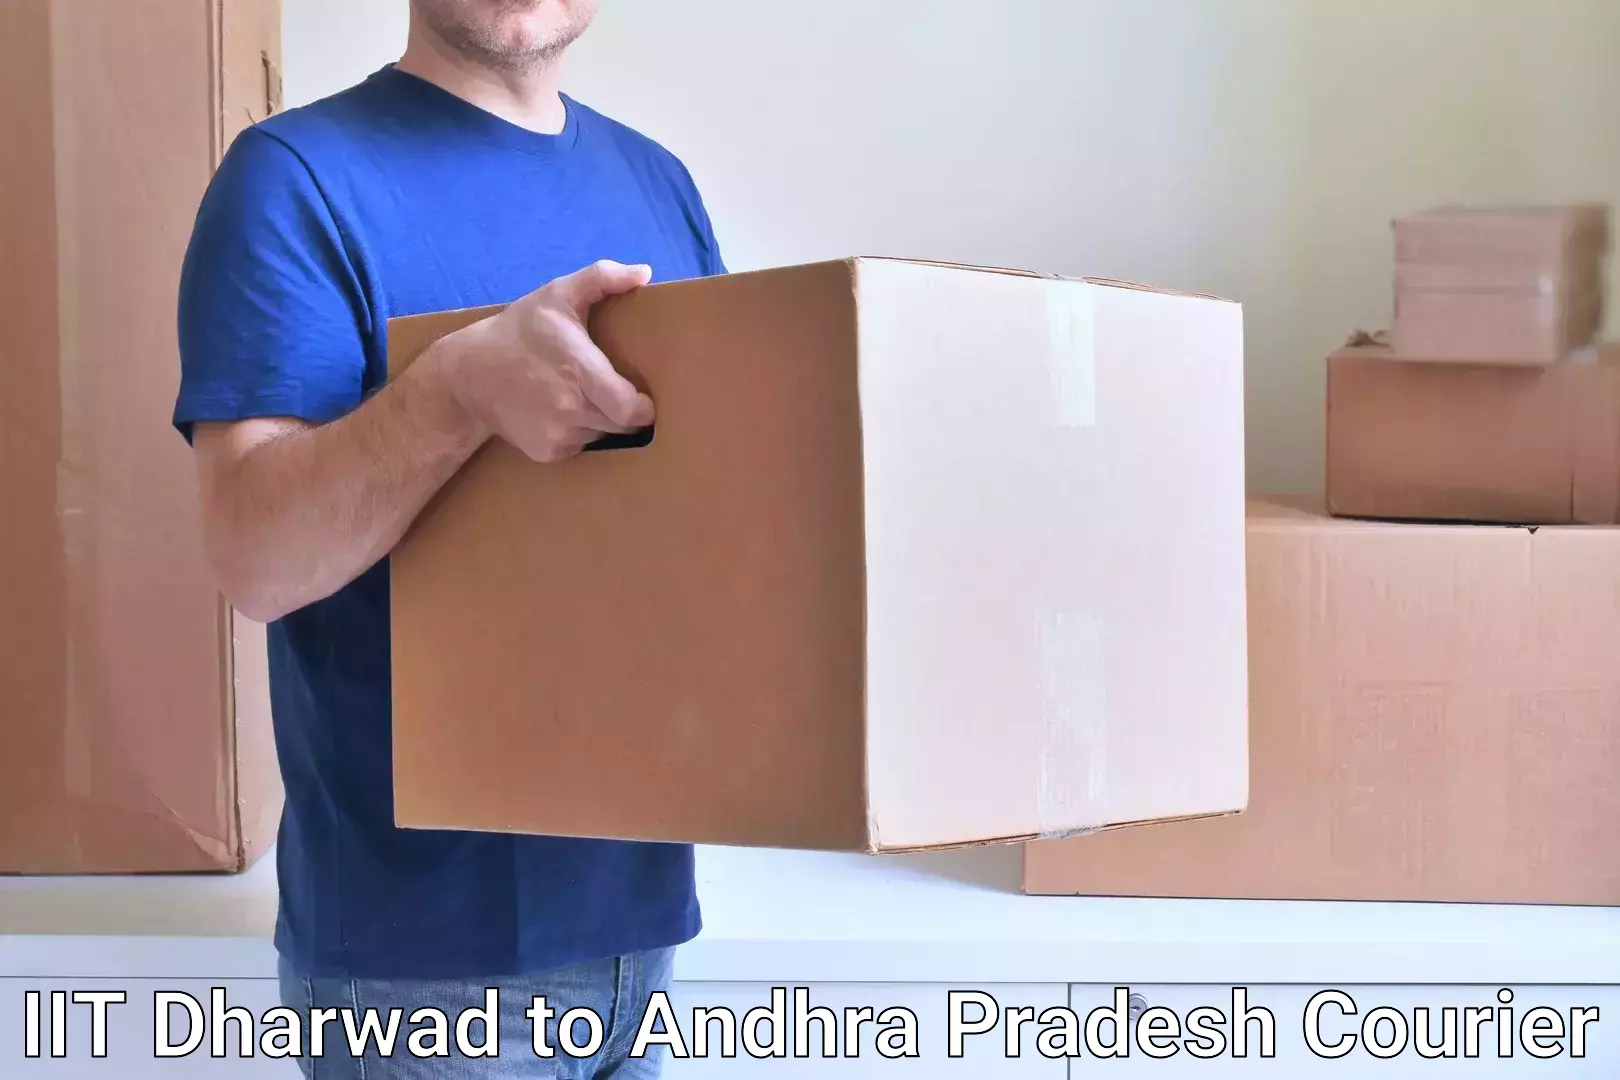 Express delivery network IIT Dharwad to Andhra Pradesh